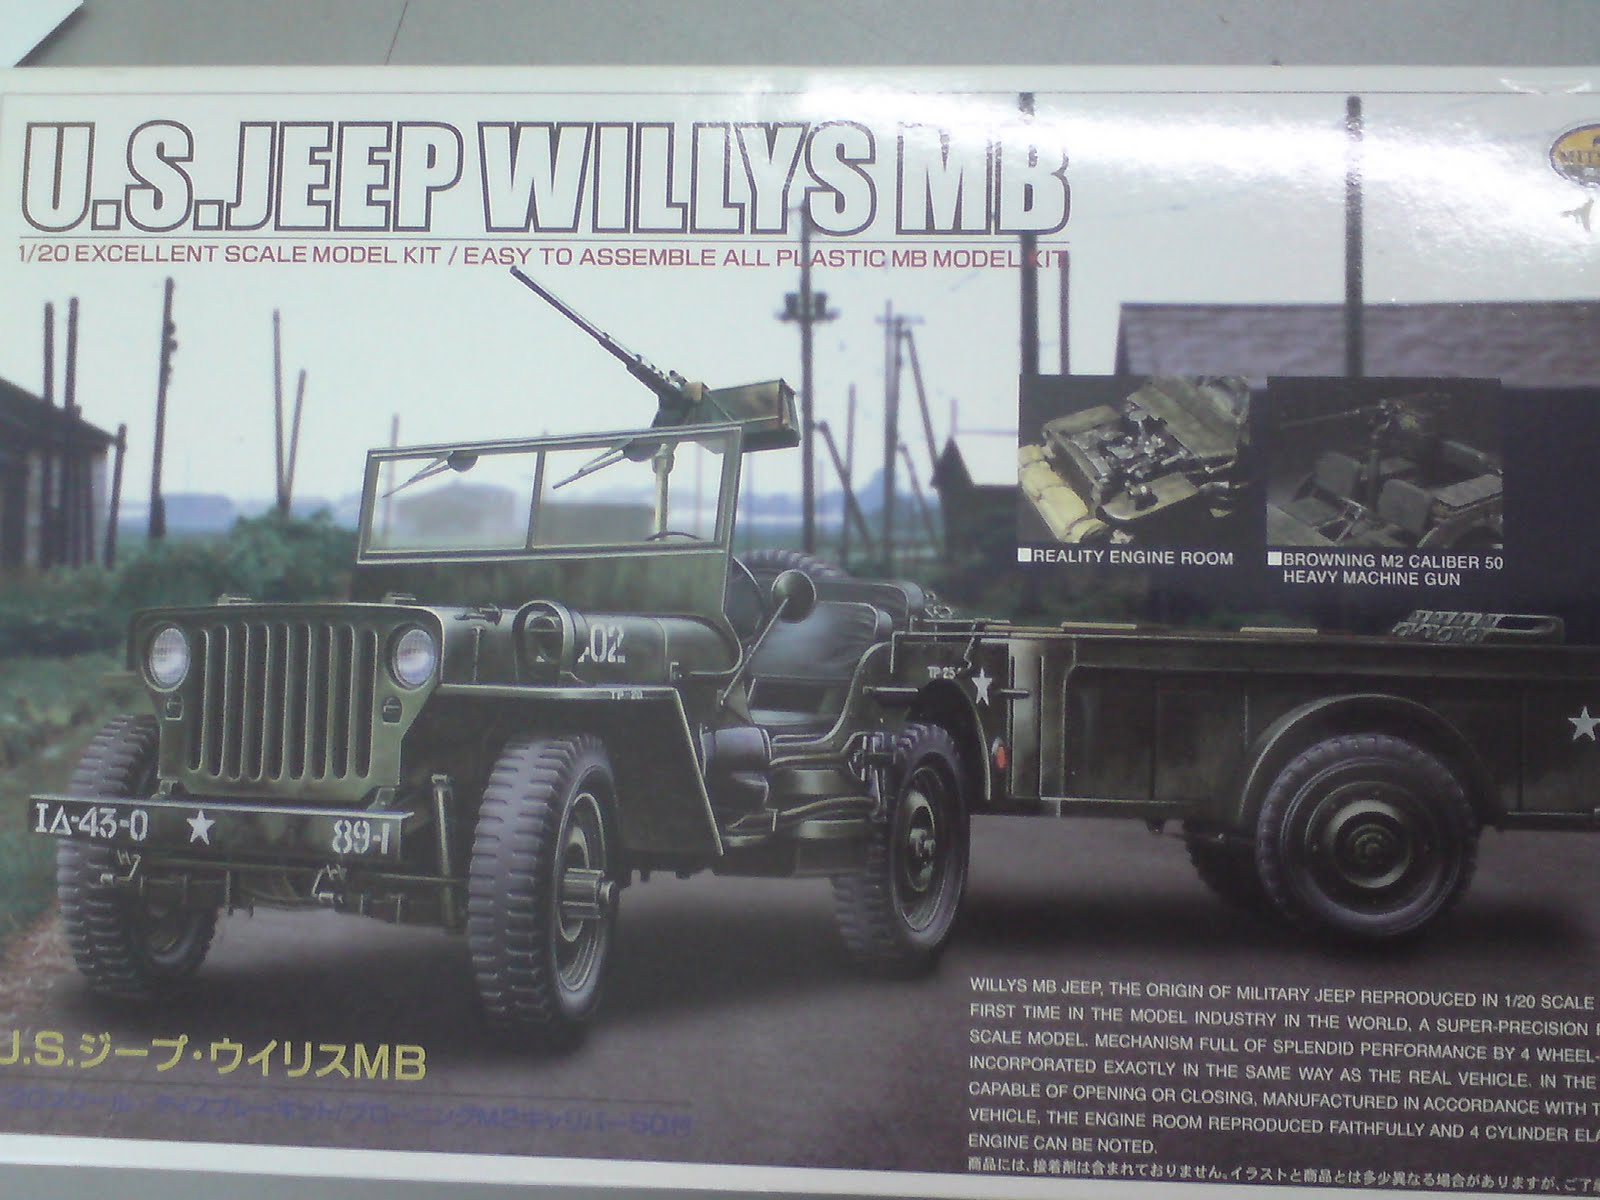 Details about   Willys MB Jeep w/ .50 cal MG 1/20 scaleMitsuwa Model jeep kitMMV-2000 